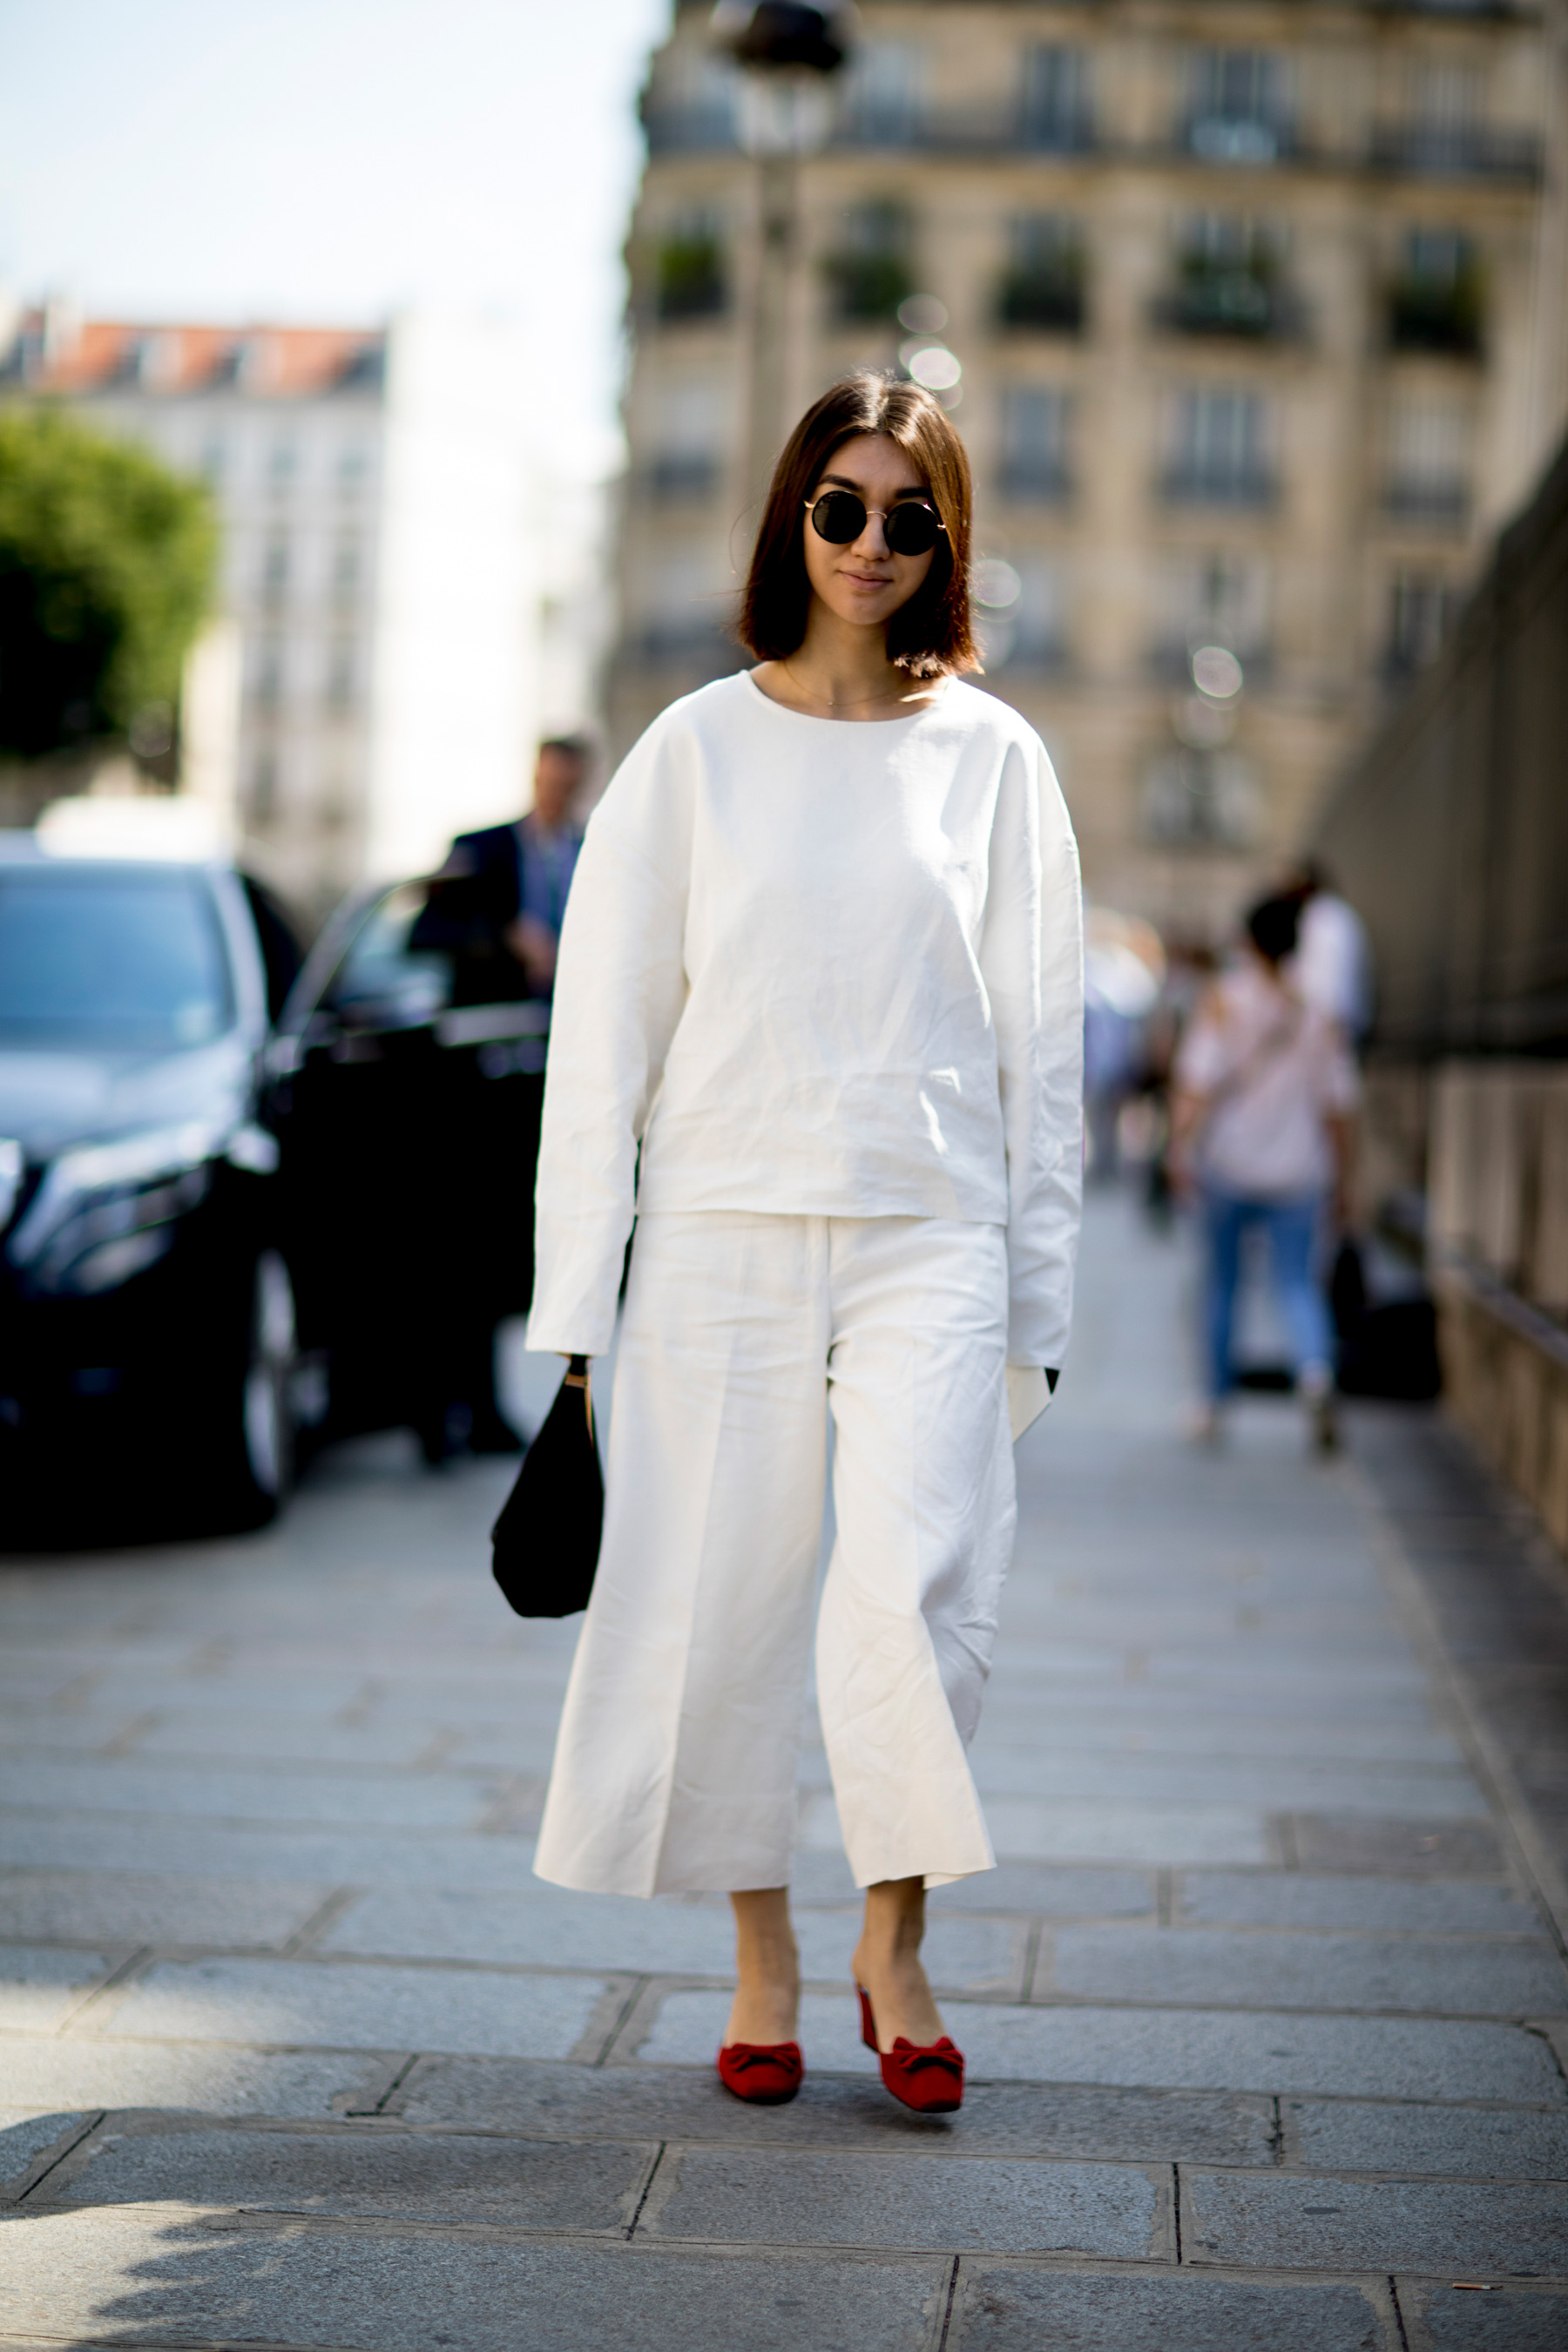 Summer Total White - The Trousers Edition - Blue is in Fashion this Year